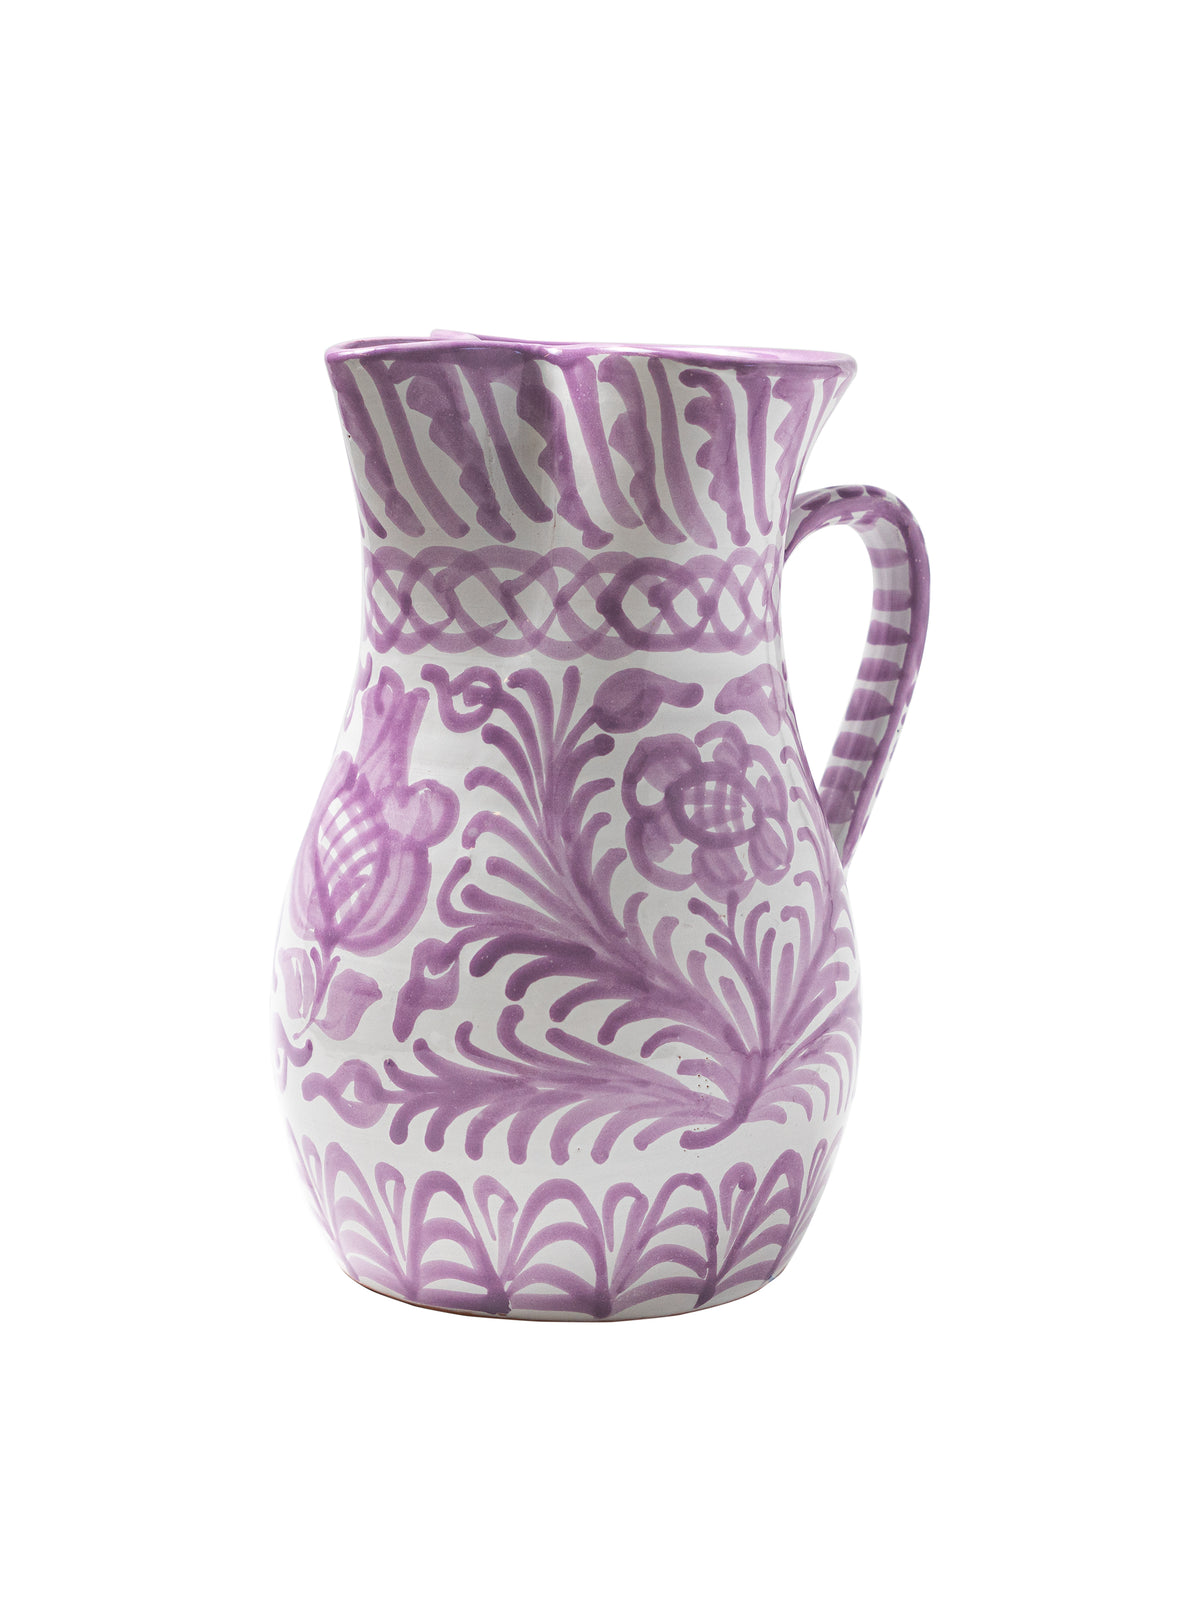 Casa Lila Large Pitcher with Hand-painted Designs